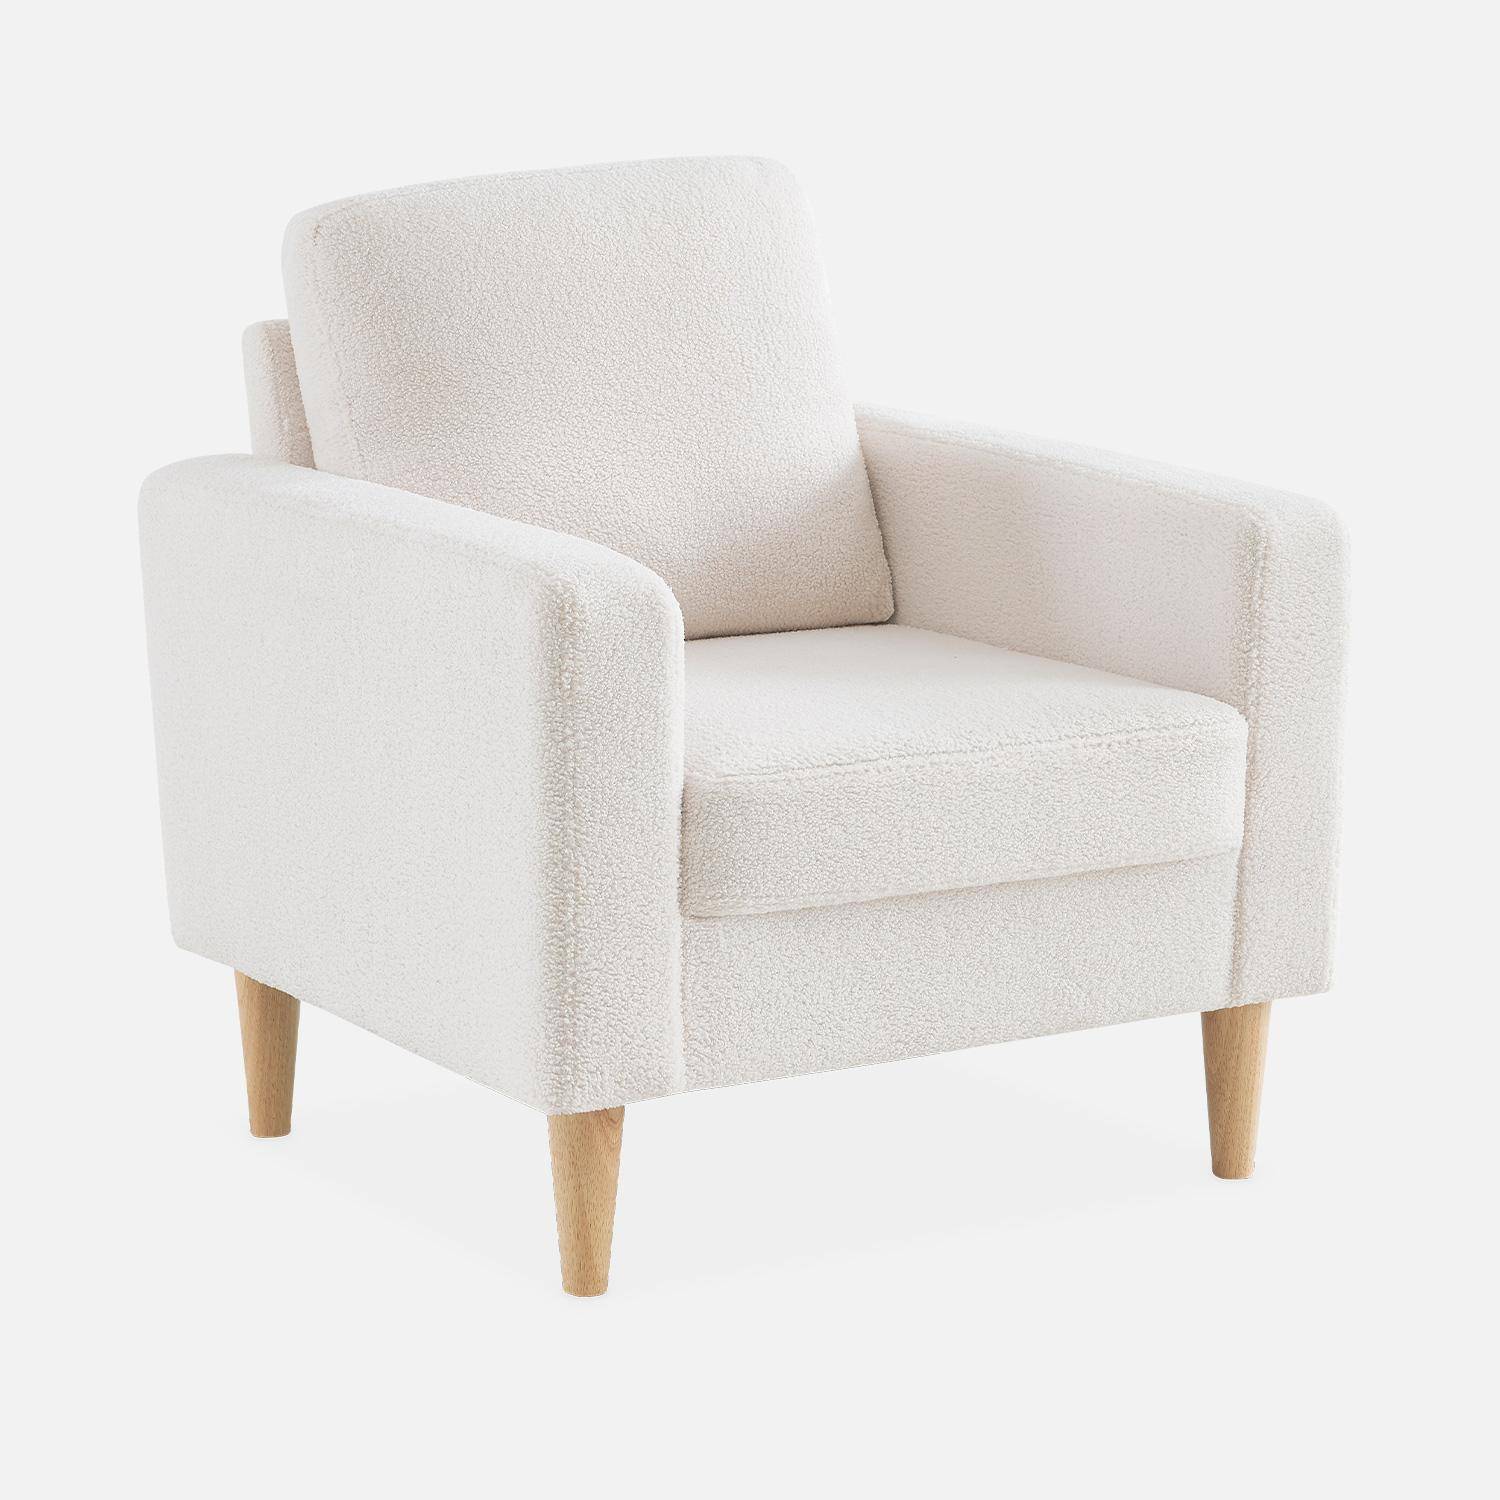 3-seater sofa Scandi-style and armchair with wooden legs, white boucle, Bjorn duo,sweeek,Photo4